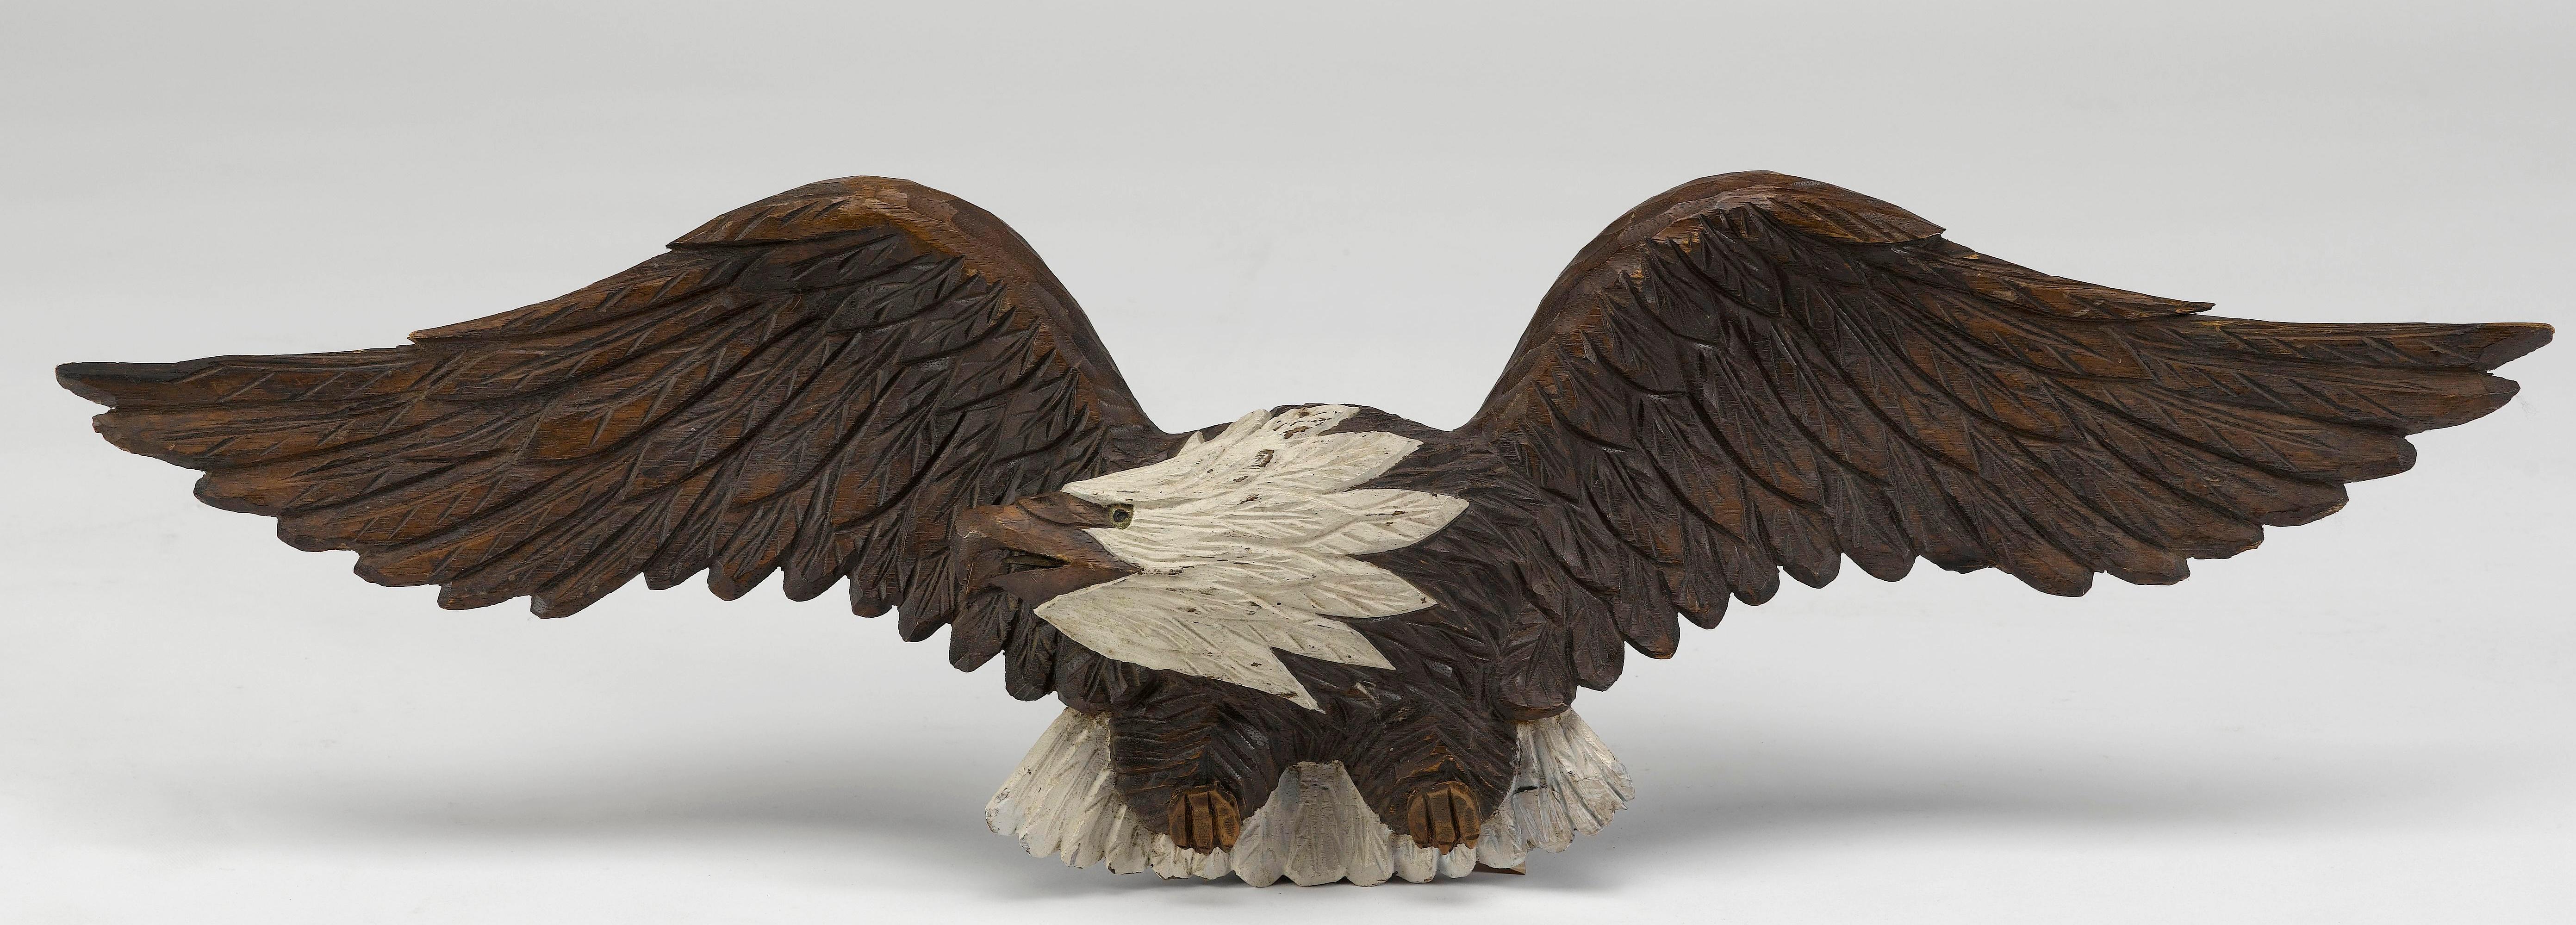 This is a stunning early to mid 20th century hand-carved bald eagle. The eagle is carved out of one large piece of wood, making the intricate detailing on the feathers and beak that much more impressive. The eagle is displayed with both wings